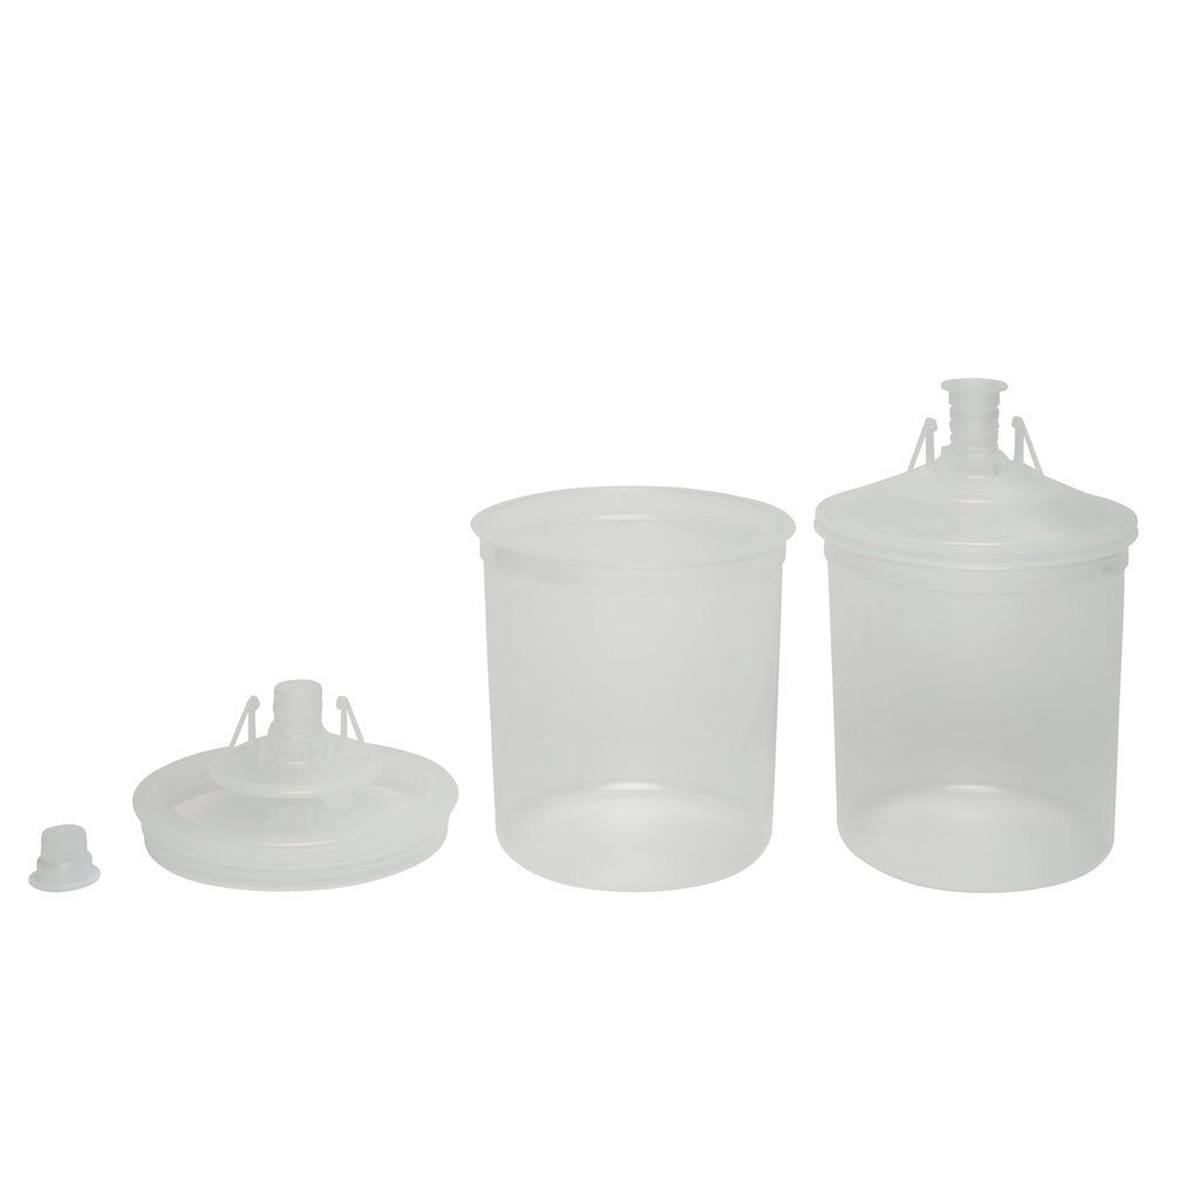 3M PPS Kit filter 200my, 50 bags &amp; 50 lids incl. filter &amp; 20 storage caps 0.65l #E16000